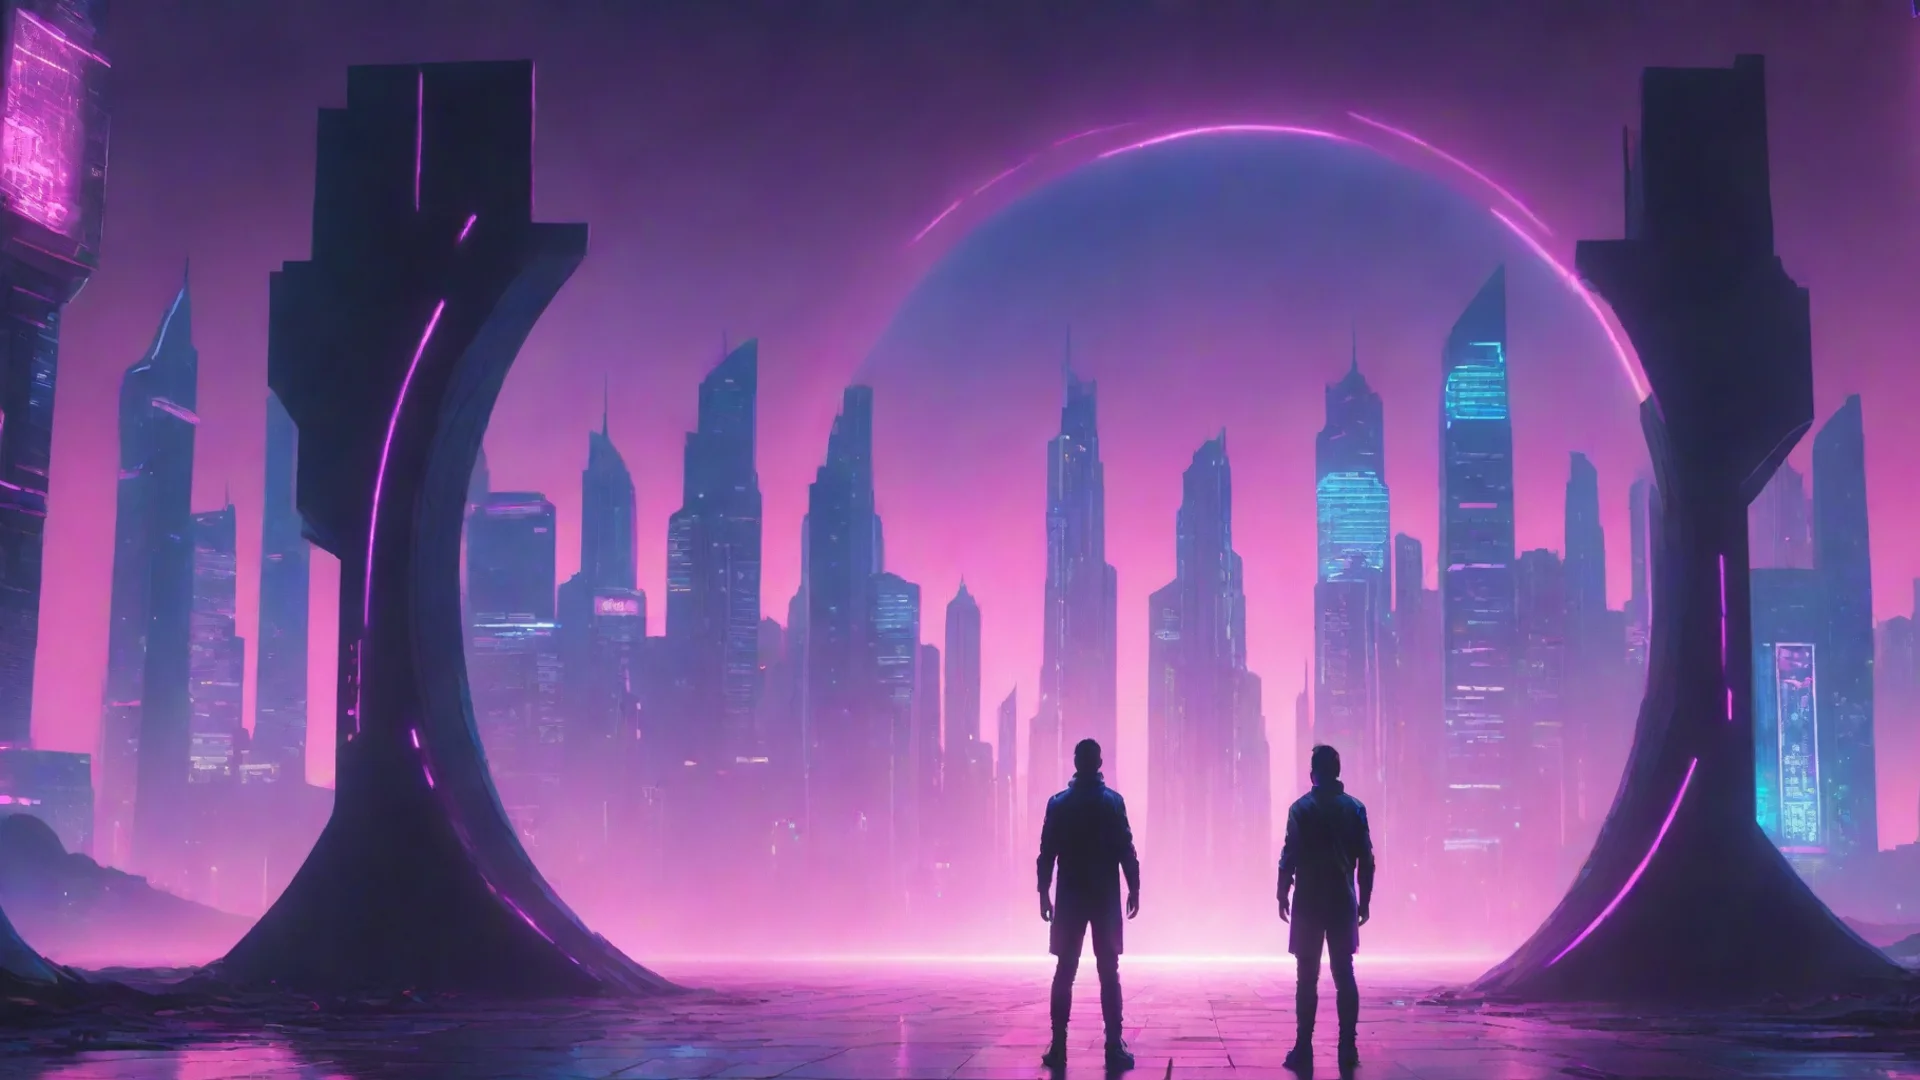 synthwave of one man standing behind the portal of the futuristic city wide